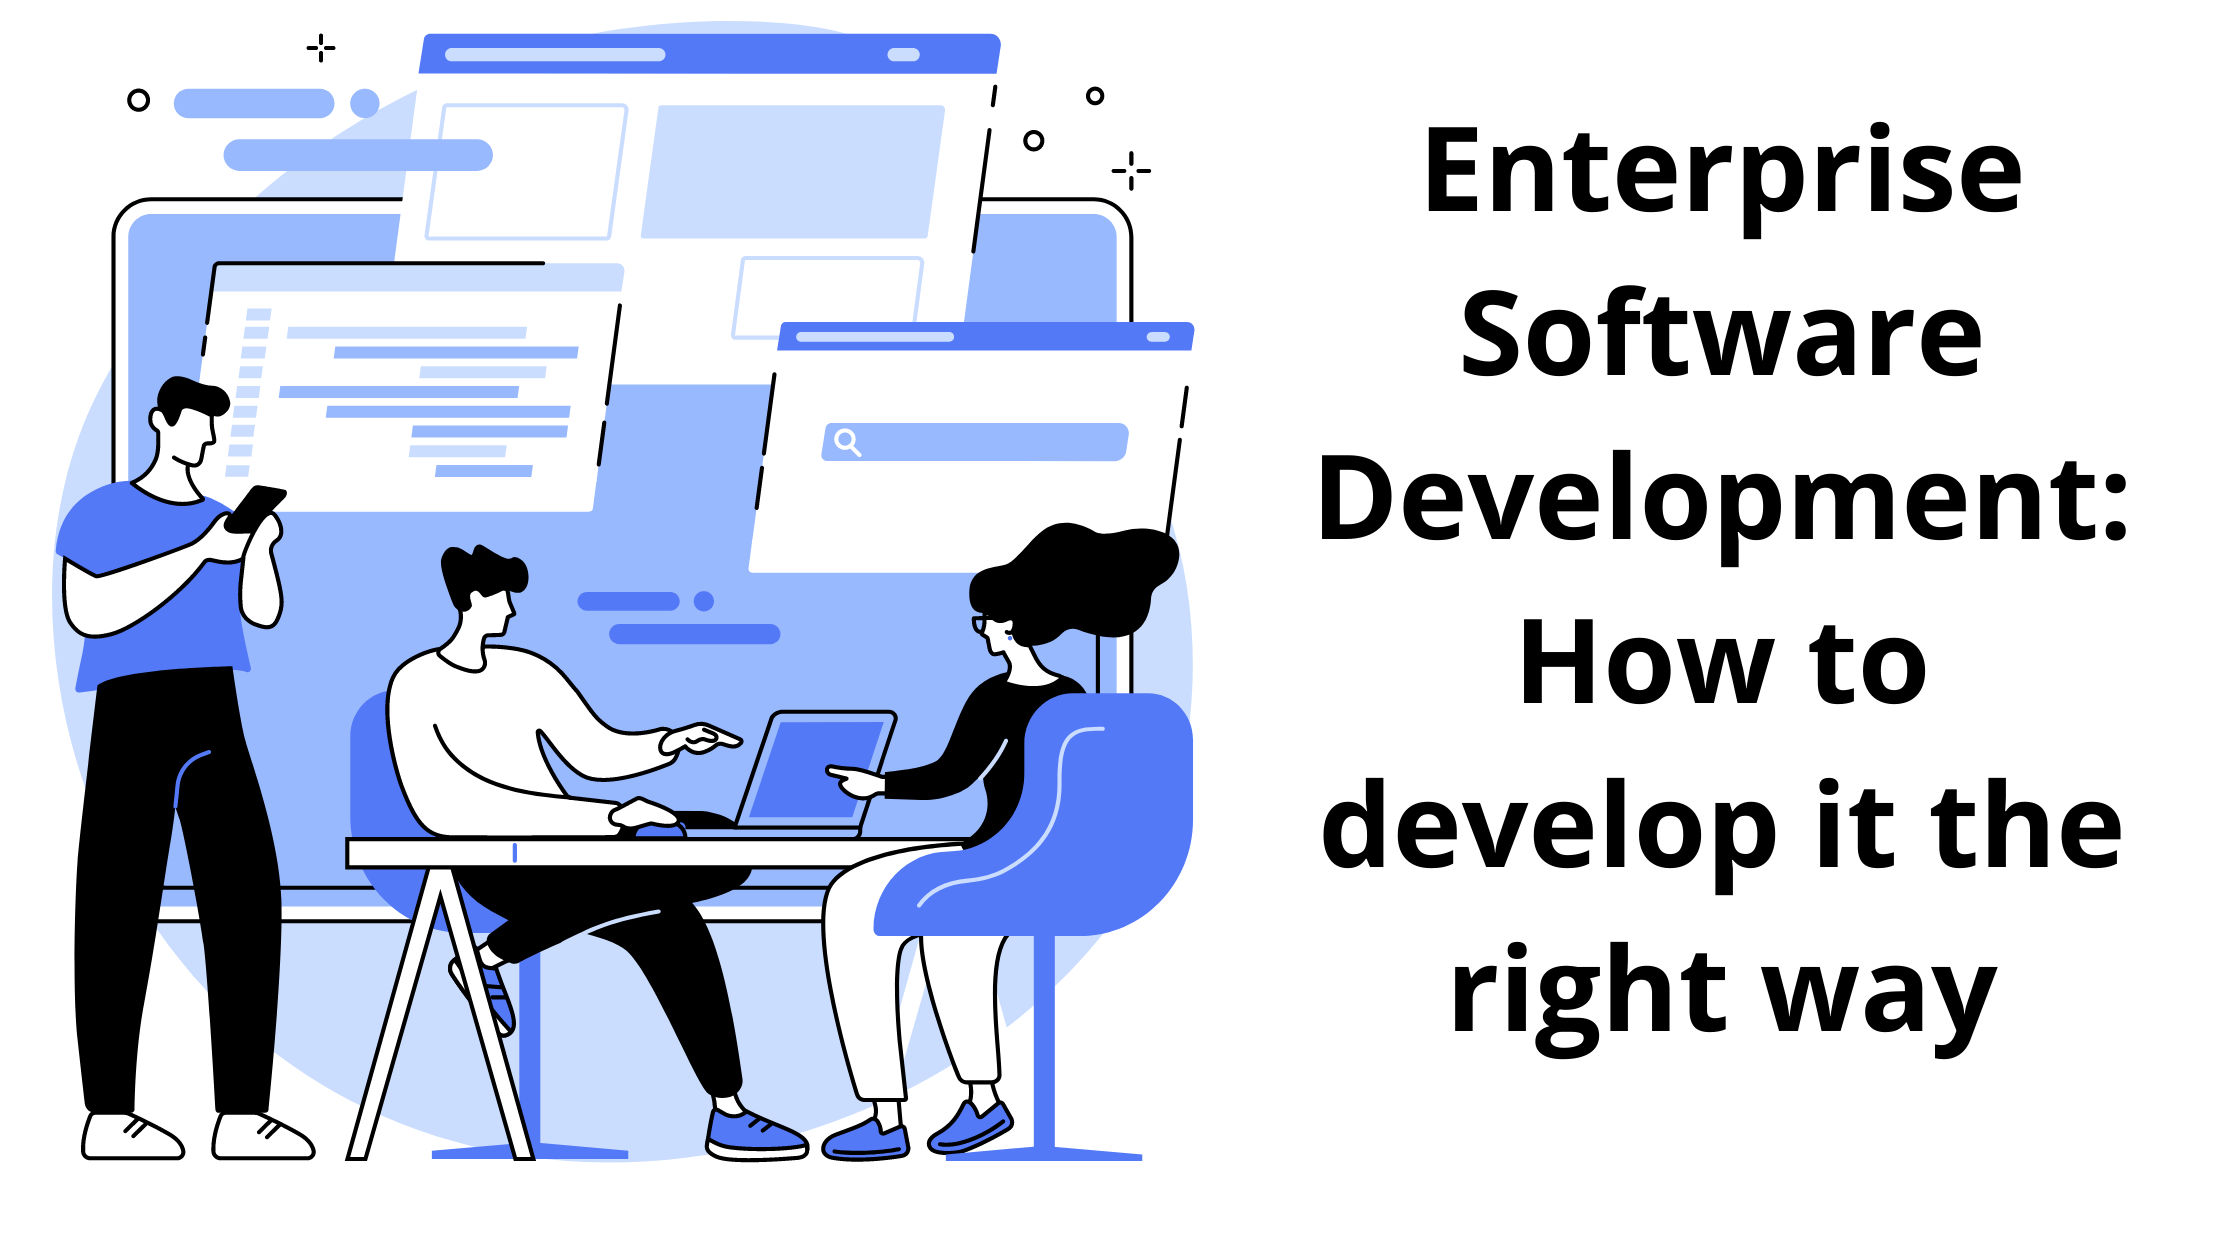 Enterprise Software Development How to develop it the right way